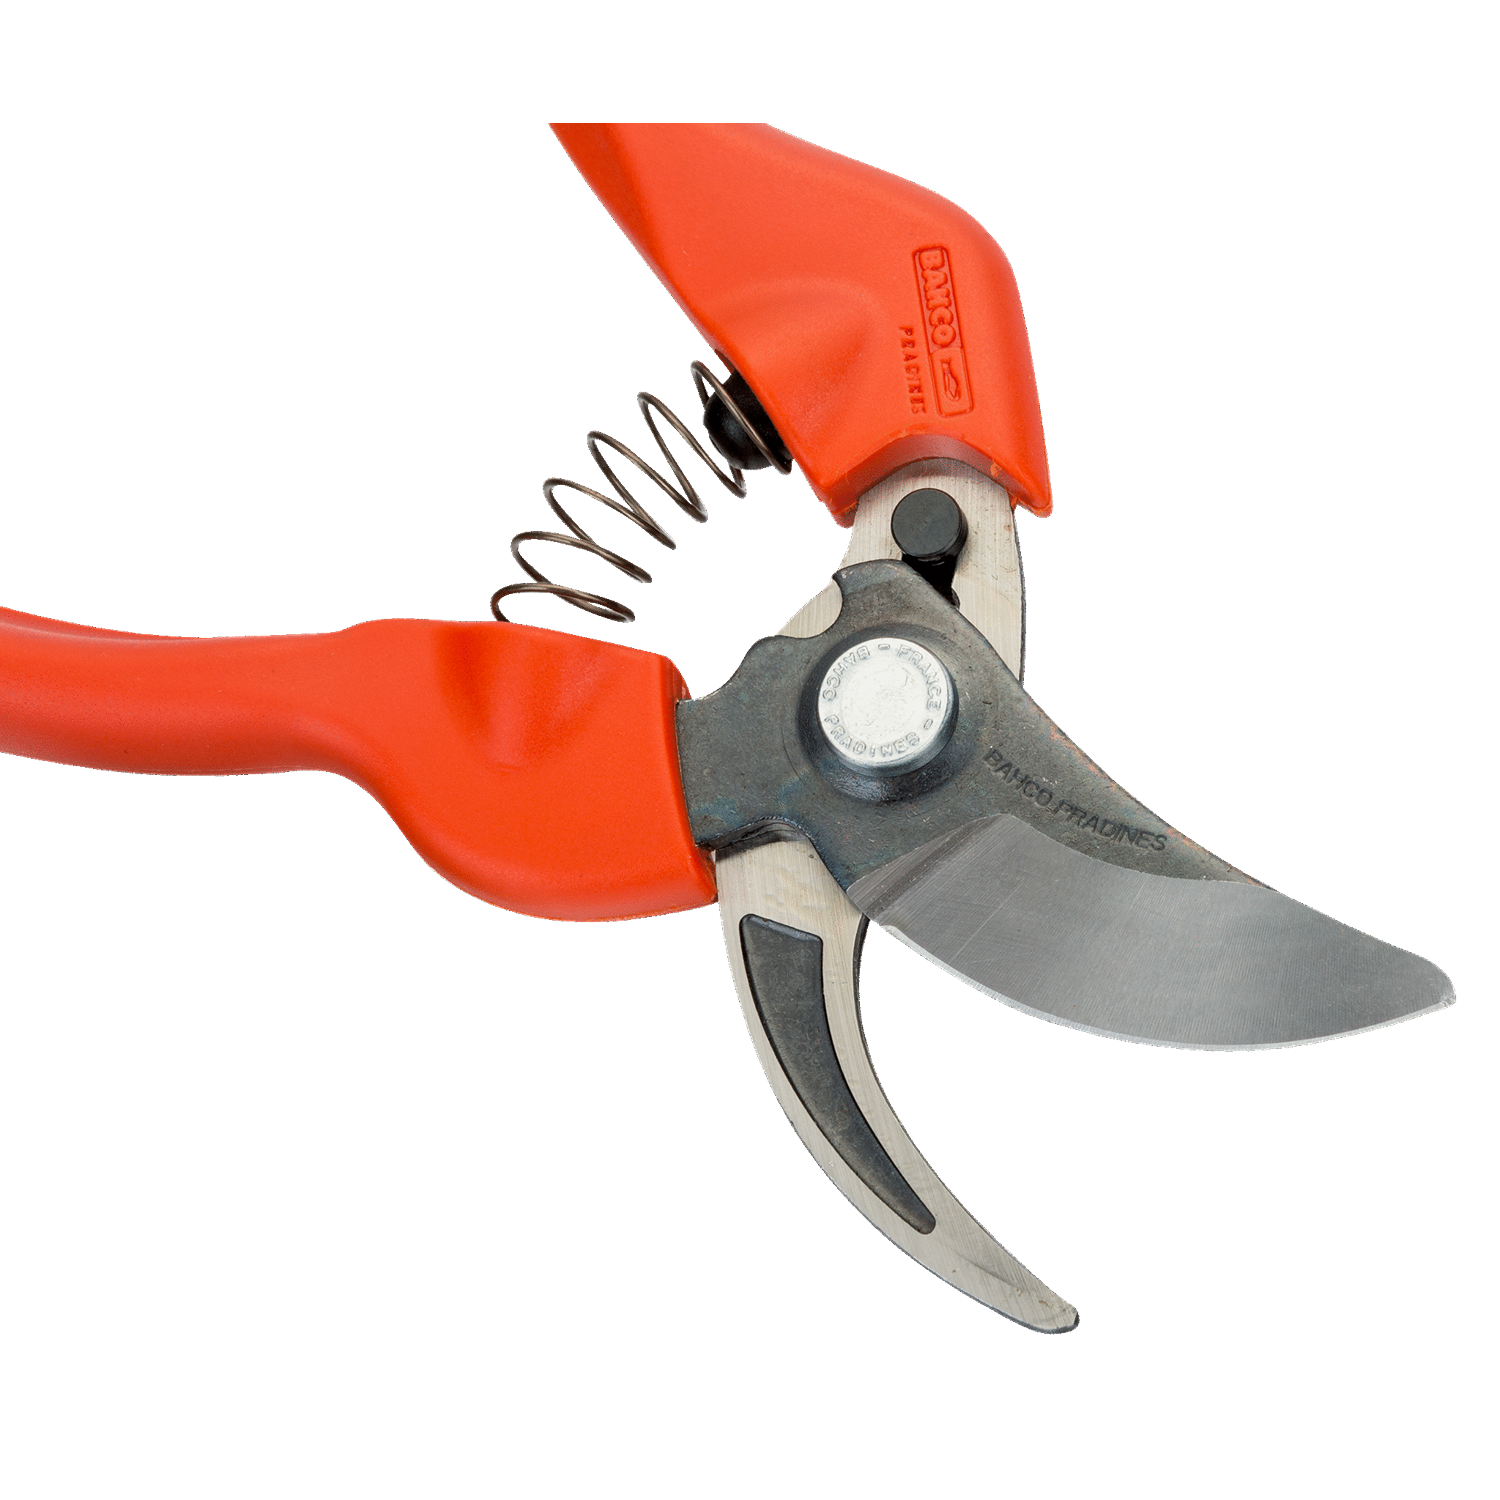 BAHCO PG-12 Left and Right Handed Bypass Secateurs - 20 mm - Premium Secateurs from BAHCO - Shop now at Yew Aik.